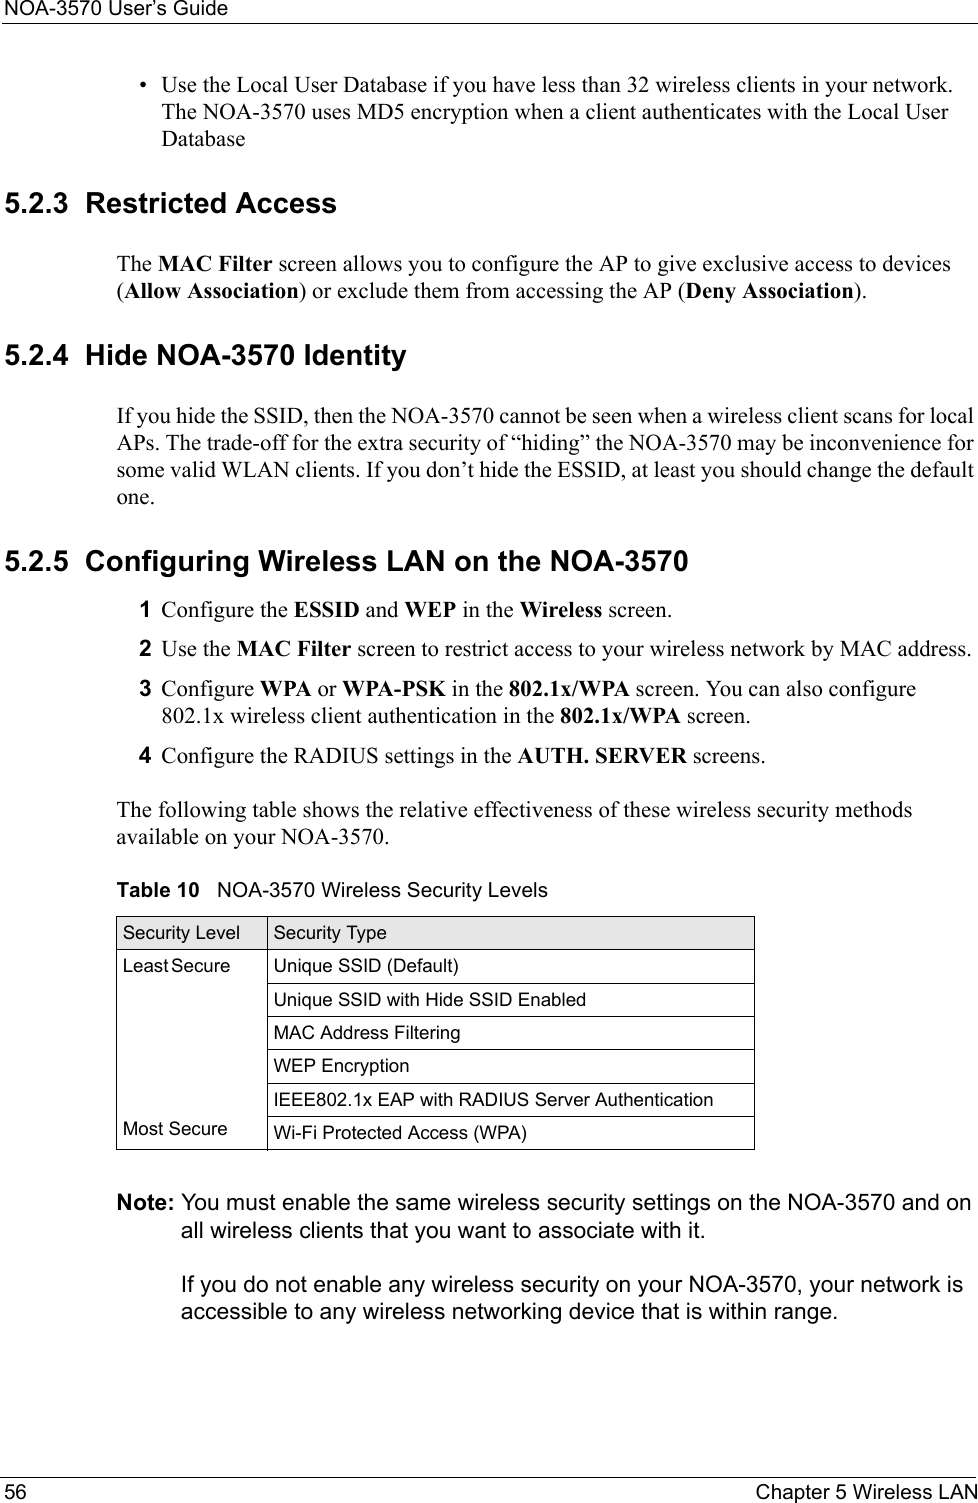 NOA-3570 User’s Guide56 Chapter 5 Wireless LAN• Use the Local User Database if you have less than 32 wireless clients in your network. The NOA-3570 uses MD5 encryption when a client authenticates with the Local User Database 5.2.3  Restricted AccessThe MAC Filter screen allows you to configure the AP to give exclusive access to devices (Allow Association) or exclude them from accessing the AP (Deny Association). 5.2.4  Hide NOA-3570 IdentityIf you hide the SSID, then the NOA-3570 cannot be seen when a wireless client scans for local APs. The trade-off for the extra security of “hiding” the NOA-3570 may be inconvenience for some valid WLAN clients. If you don’t hide the ESSID, at least you should change the default one.5.2.5  Configuring Wireless LAN on the NOA-35701Configure the ESSID and WEP in the Wireless screen.2Use the MAC Filter screen to restrict access to your wireless network by MAC address. 3Configure WPA or WPA-PSK in the 802.1x/WPA screen. You can also configure 802.1x wireless client authentication in the 802.1x/WPA screen.4Configure the RADIUS settings in the AUTH. SERVER screens.The following table shows the relative effectiveness of these wireless security methods available on your NOA-3570.Note: You must enable the same wireless security settings on the NOA-3570 and on all wireless clients that you want to associate with it. If you do not enable any wireless security on your NOA-3570, your network is accessible to any wireless networking device that is within range. Table 10   NOA-3570 Wireless Security LevelsSecurity Level Security TypeLeast       Secure                                                                                  Most SecureUnique SSID (Default)Unique SSID with Hide SSID EnabledMAC Address FilteringWEP EncryptionIEEE802.1x EAP with RADIUS Server AuthenticationWi-Fi Protected Access (WPA)